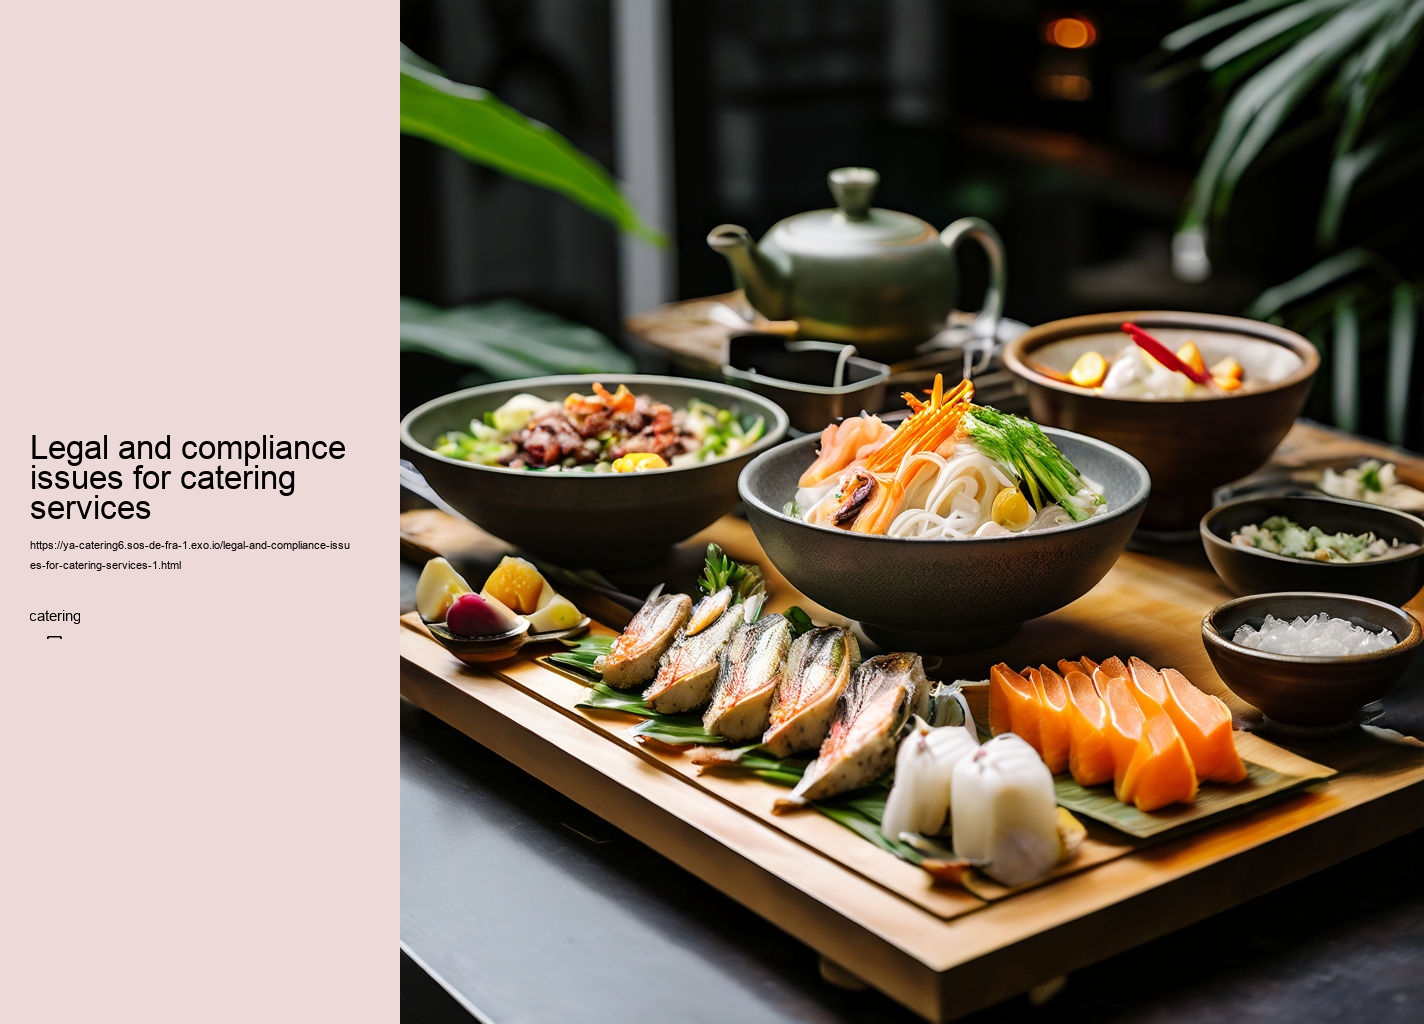 Legal and compliance issues for catering services